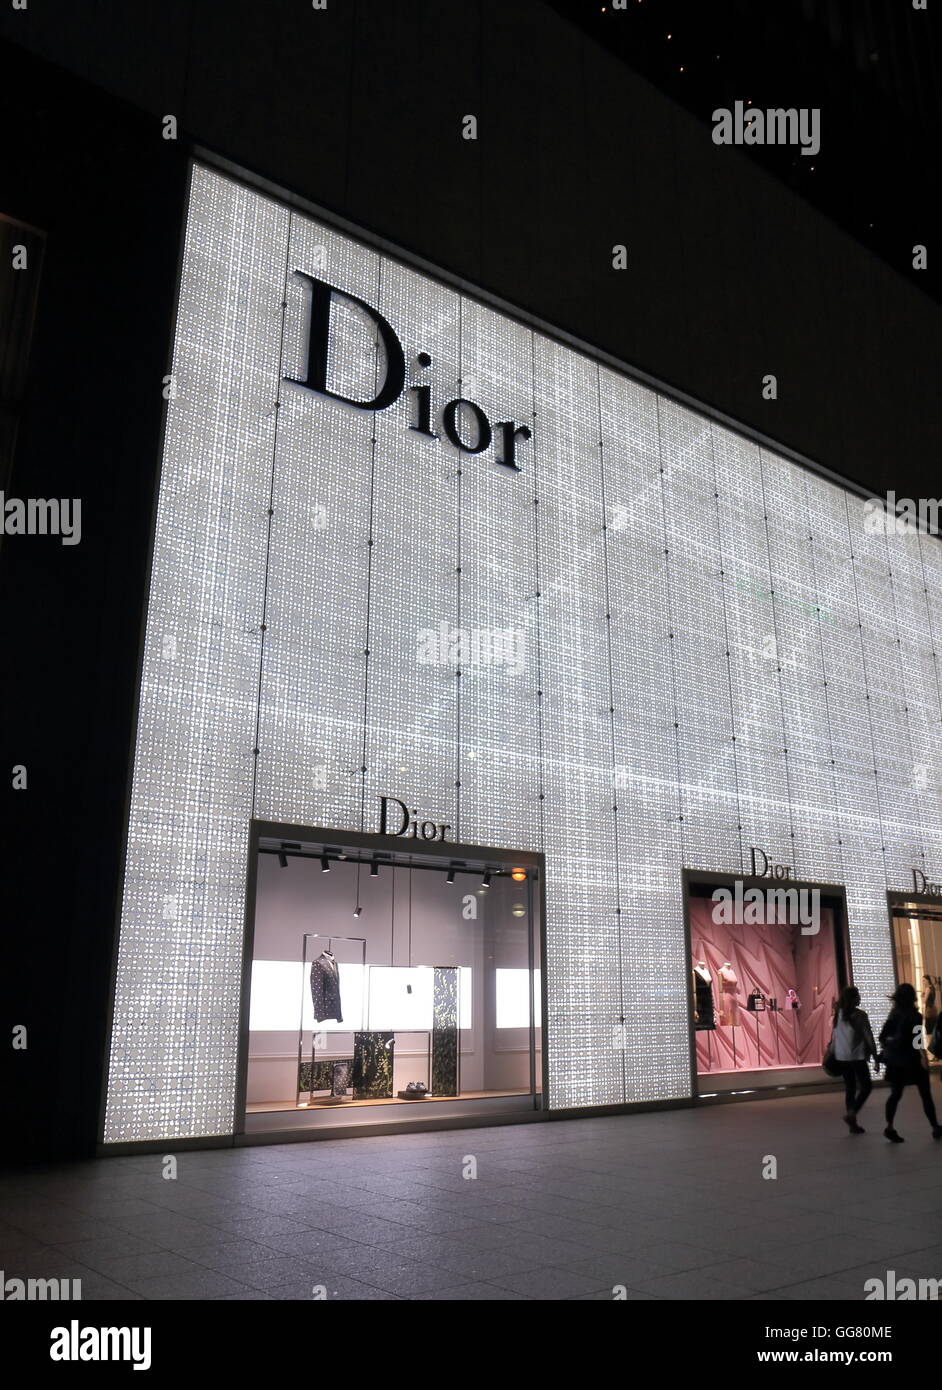 Who owns Dior?